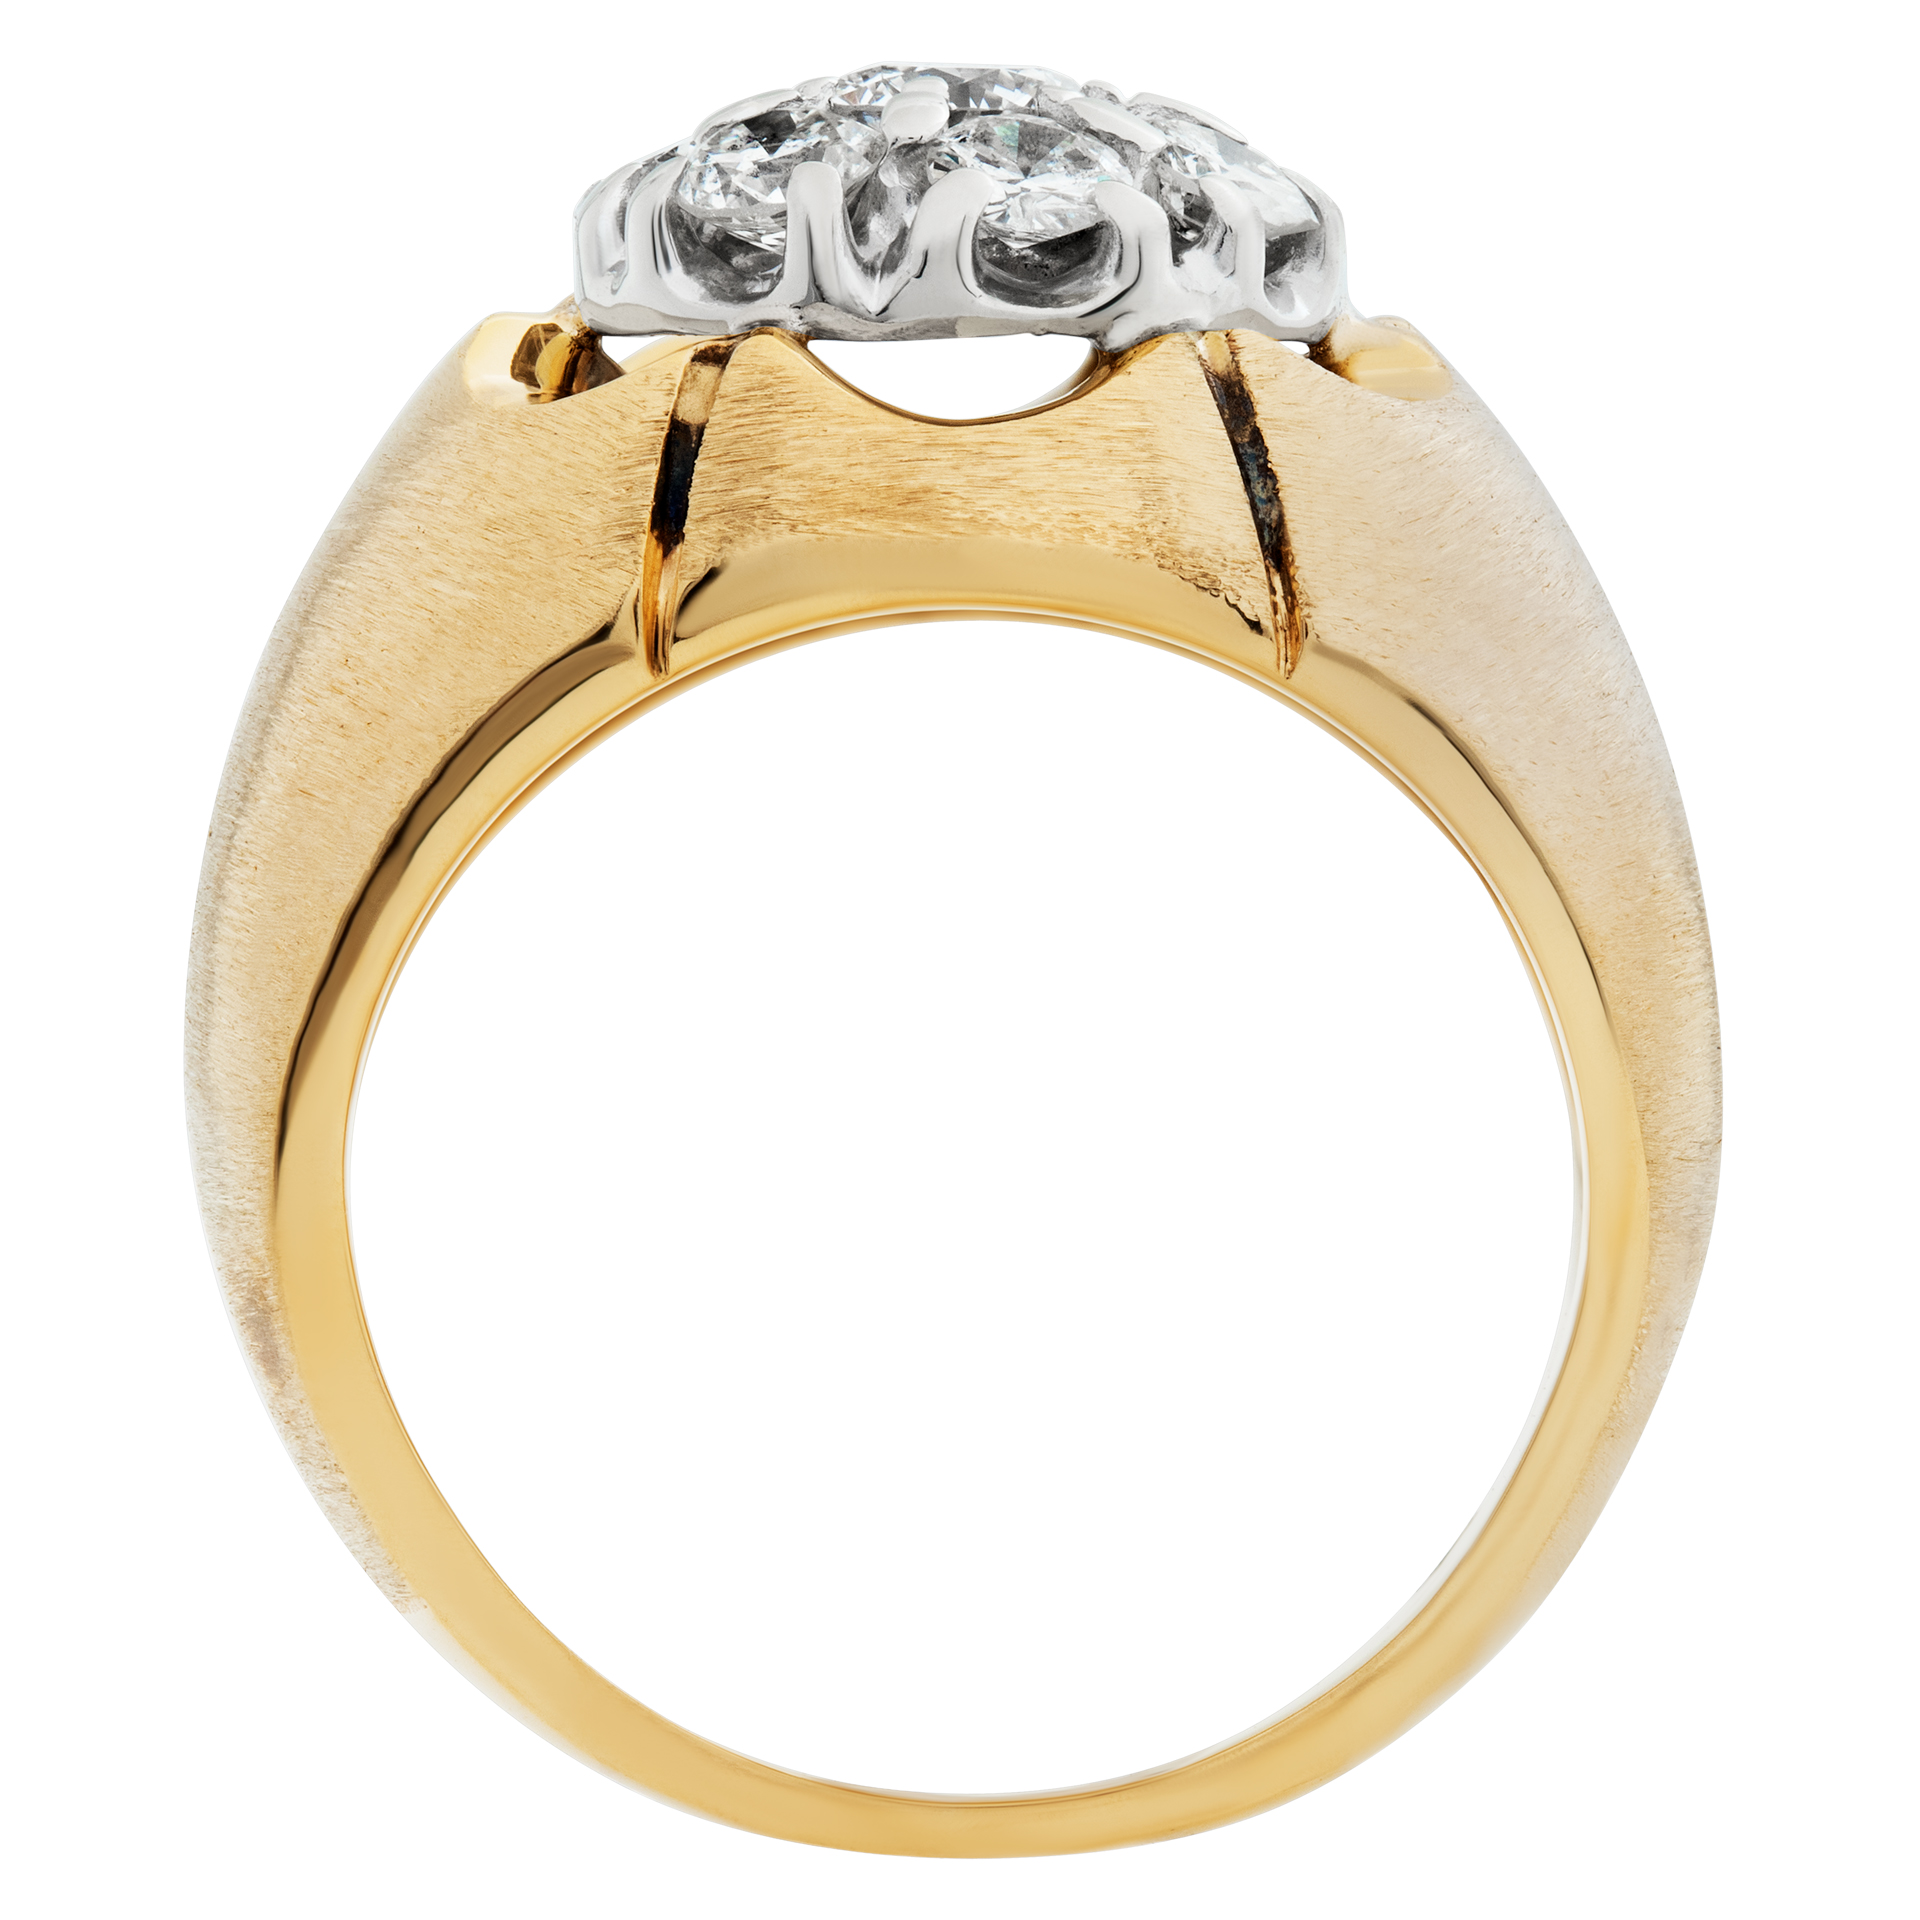 Attractive diamond ring in 14k yellow gold. 1.00 carats in diamonds. Size 8 image 4